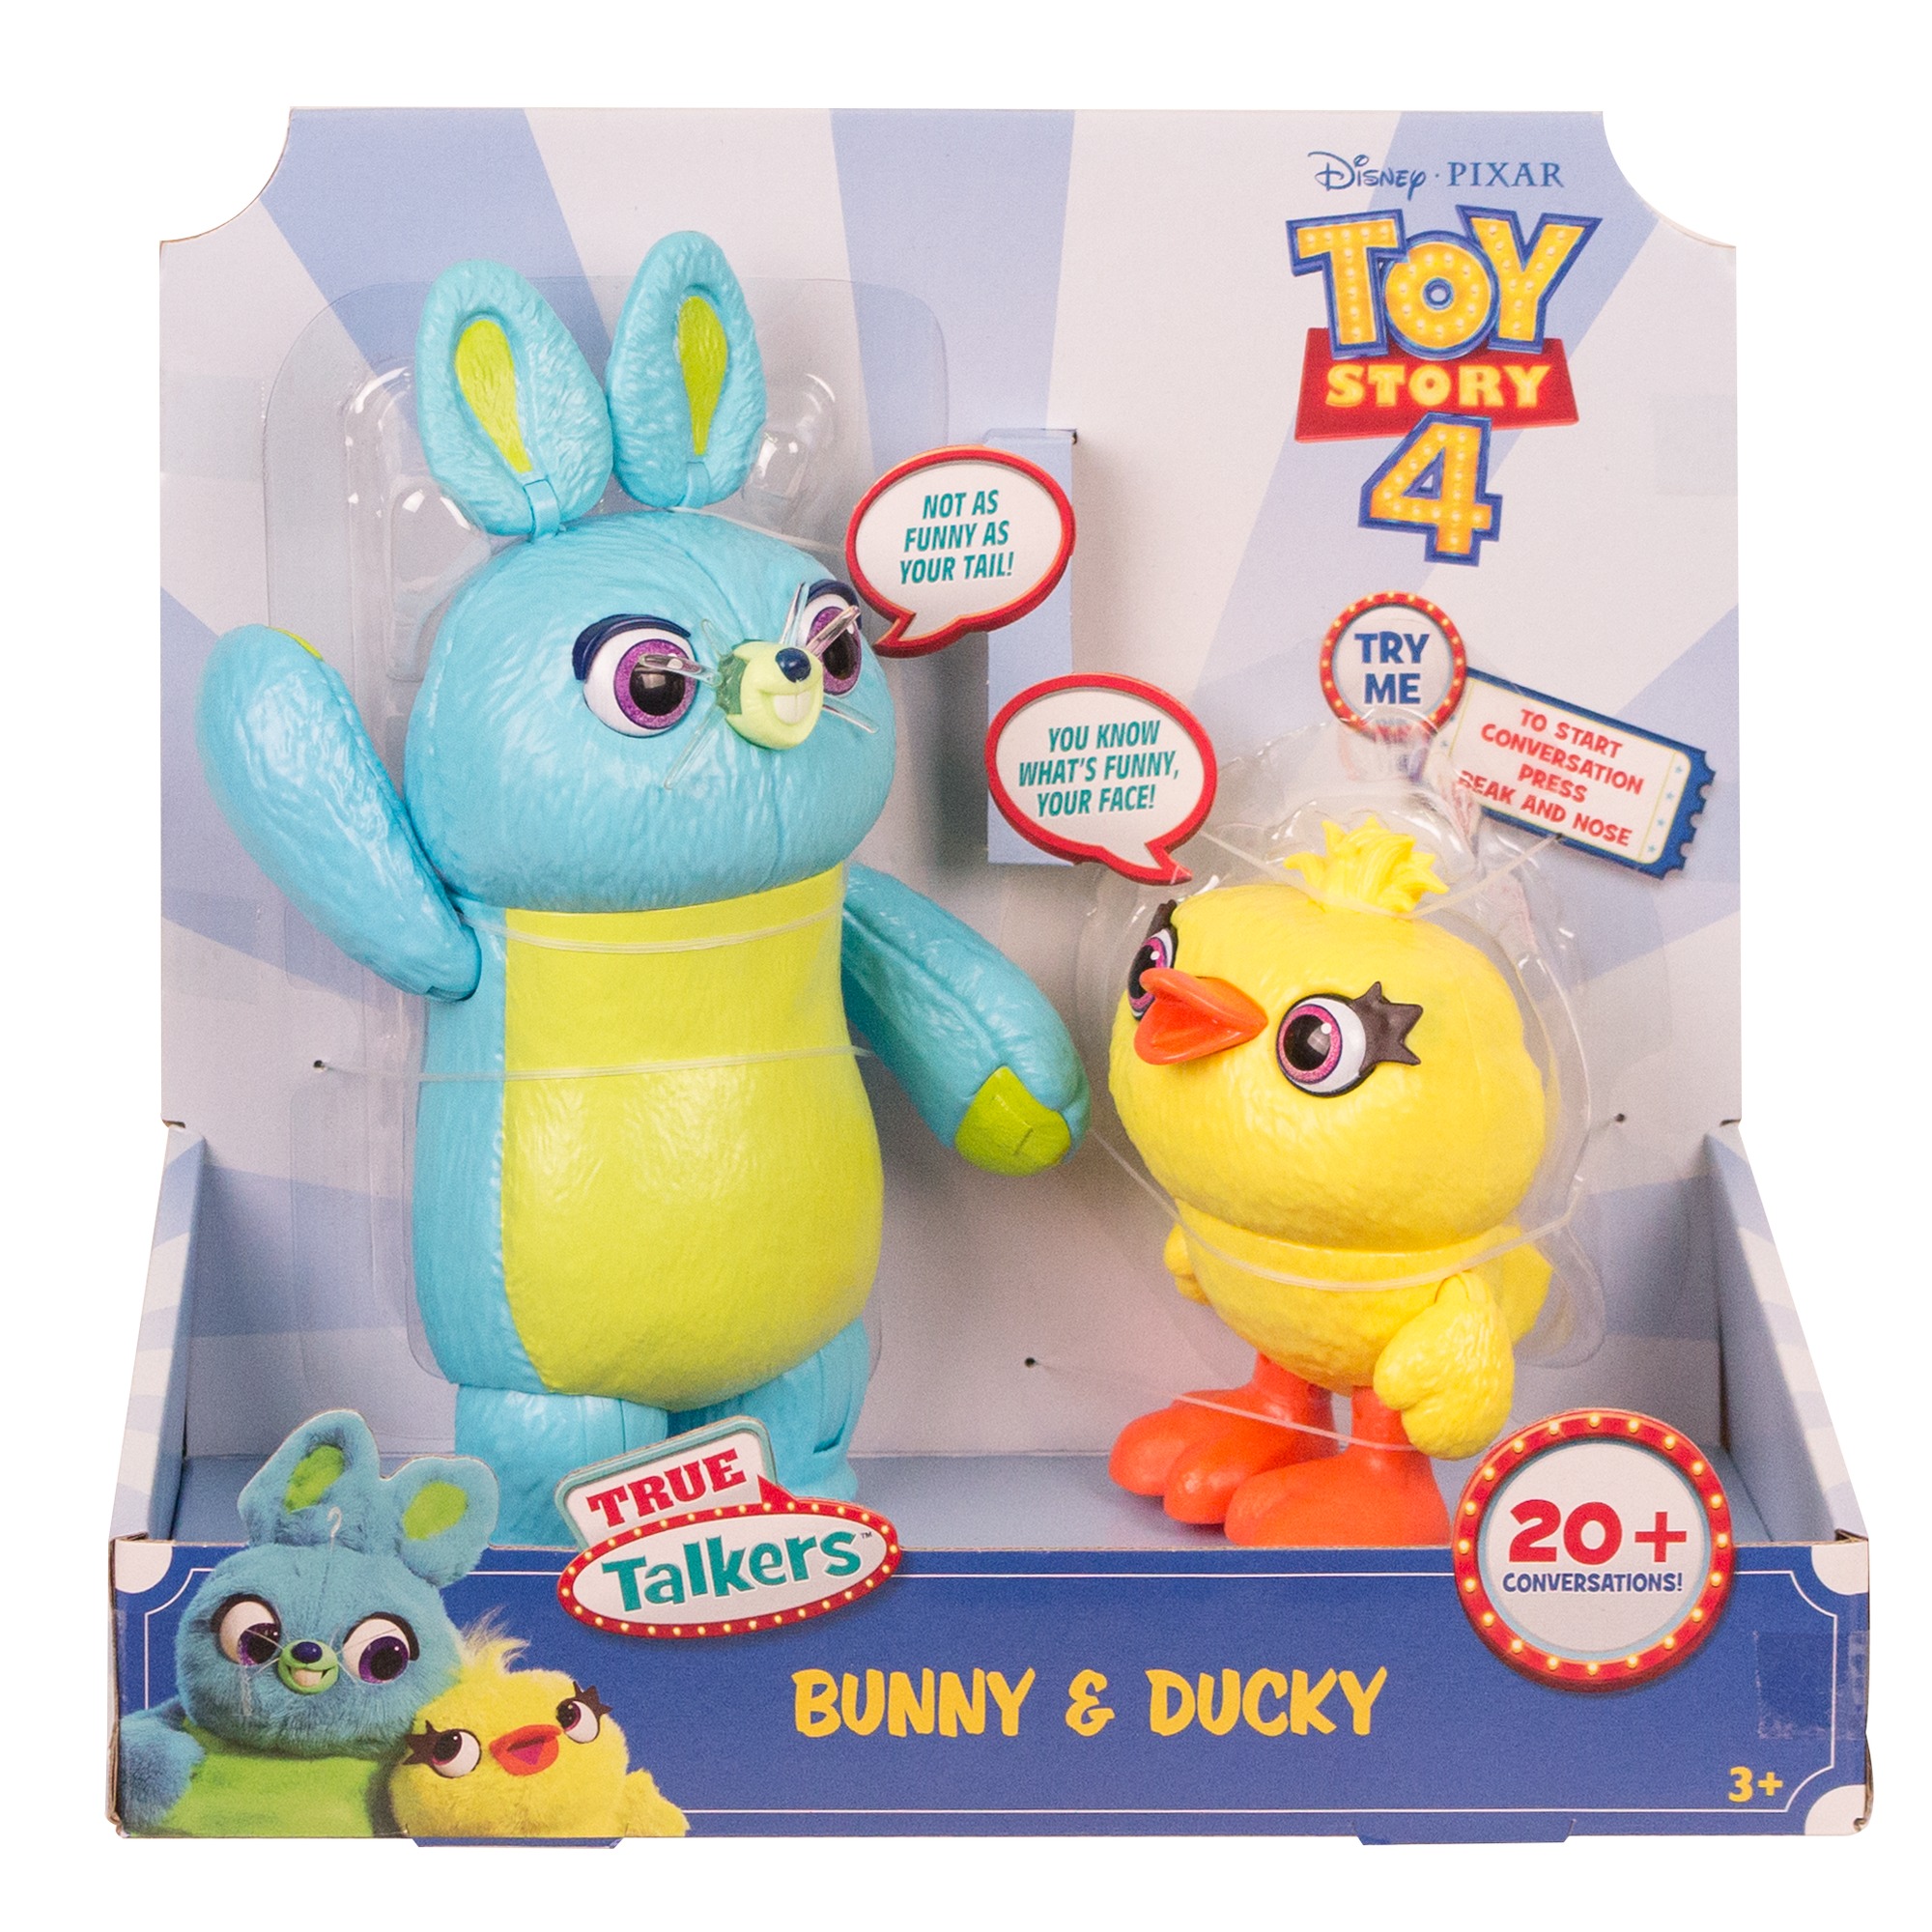 Disney Pixar Toy Story Interactive True Talkers Bunny and Ducky 2-Pack - image 5 of 5